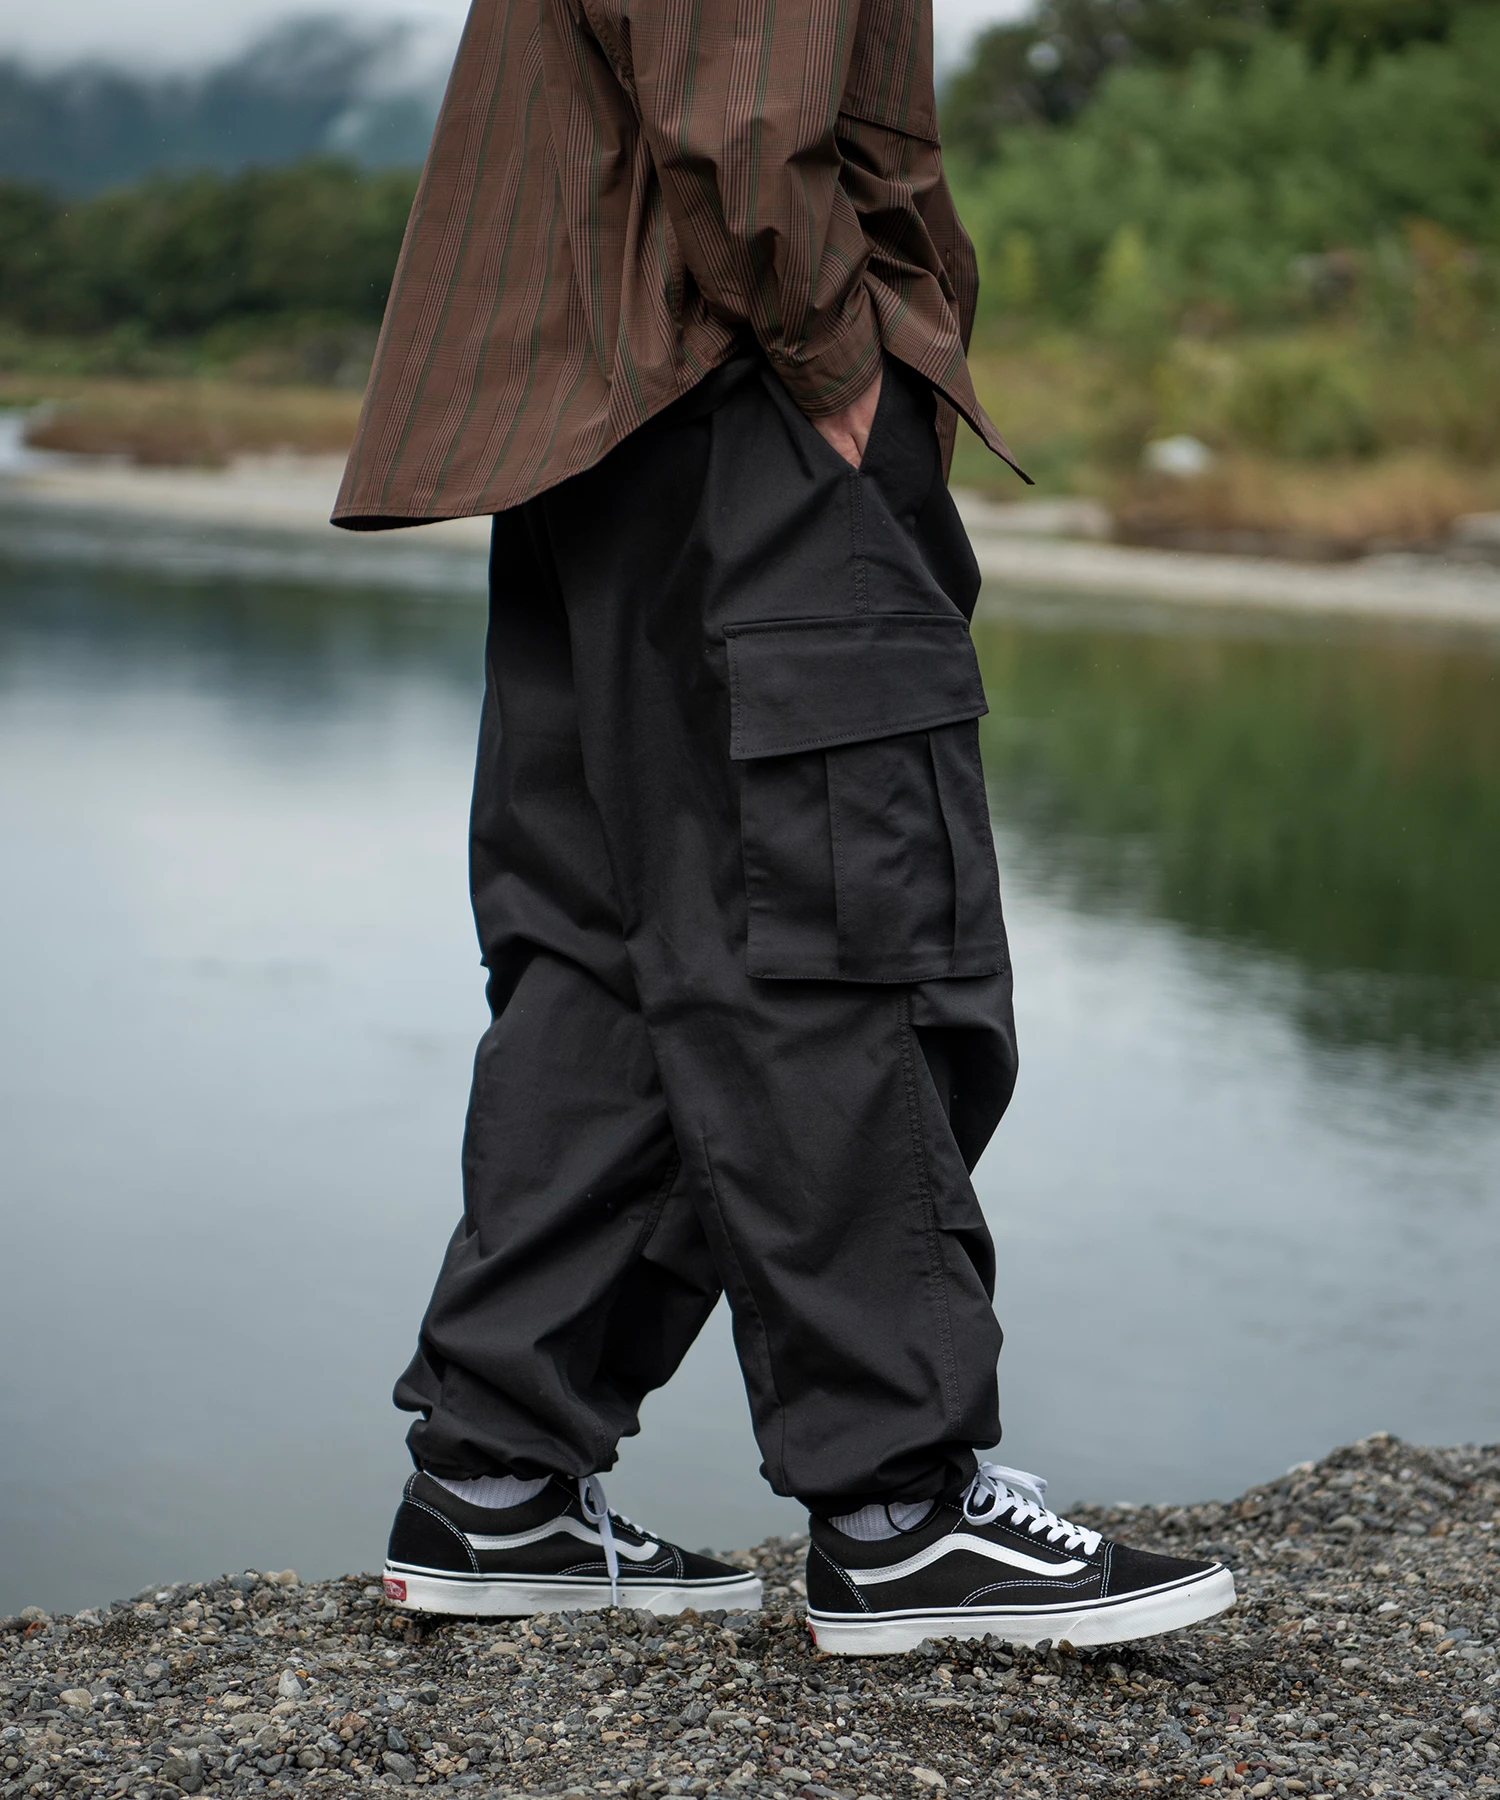 EASY CARGO PANTS ｜ THINET（シンネット）公式通販 | Re:Circulet